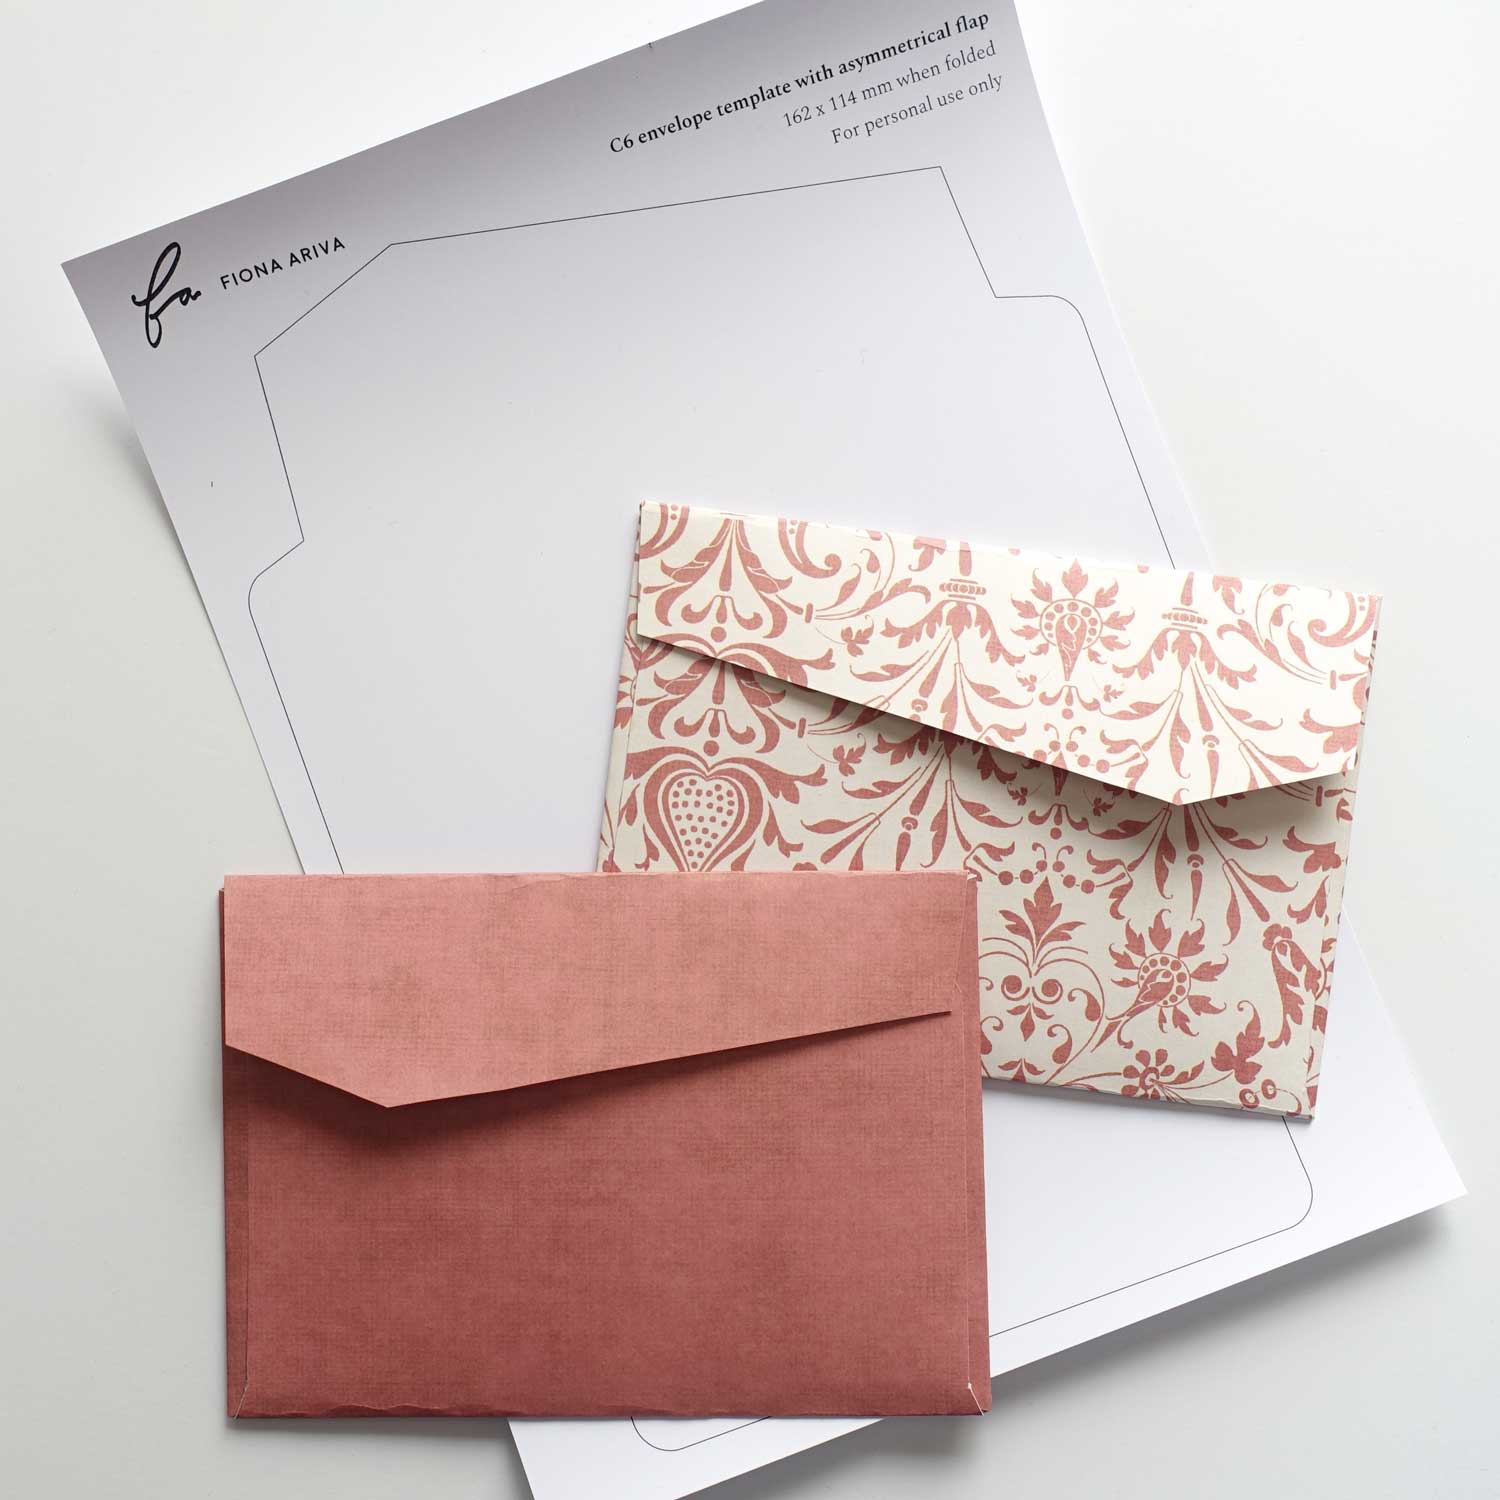 asymmetrical-flap-c6-sized-envelope-template-free-download-fiona-ariva